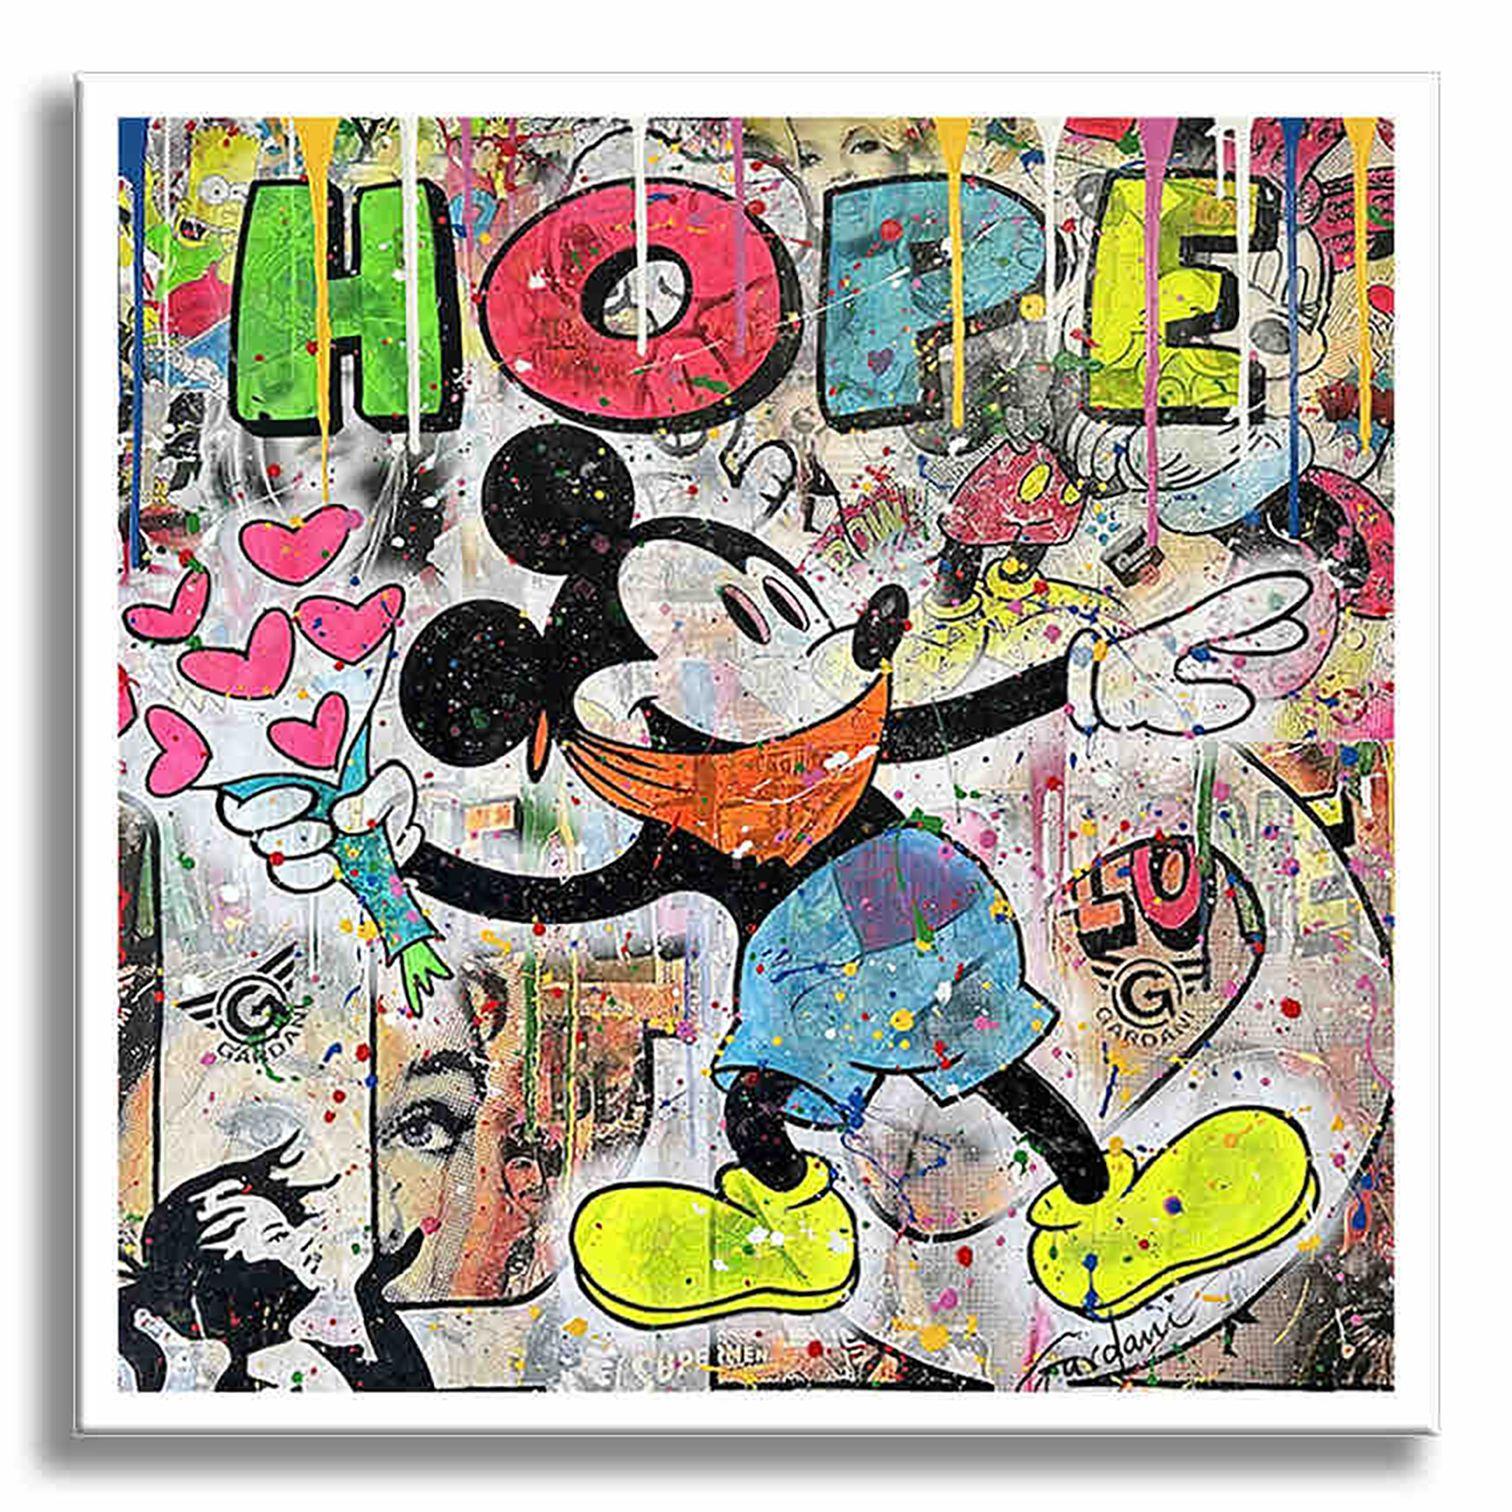 Choose Hope â€“ Original Painting on Canvas, Painting, Acrylic on Canvas For Sale 4